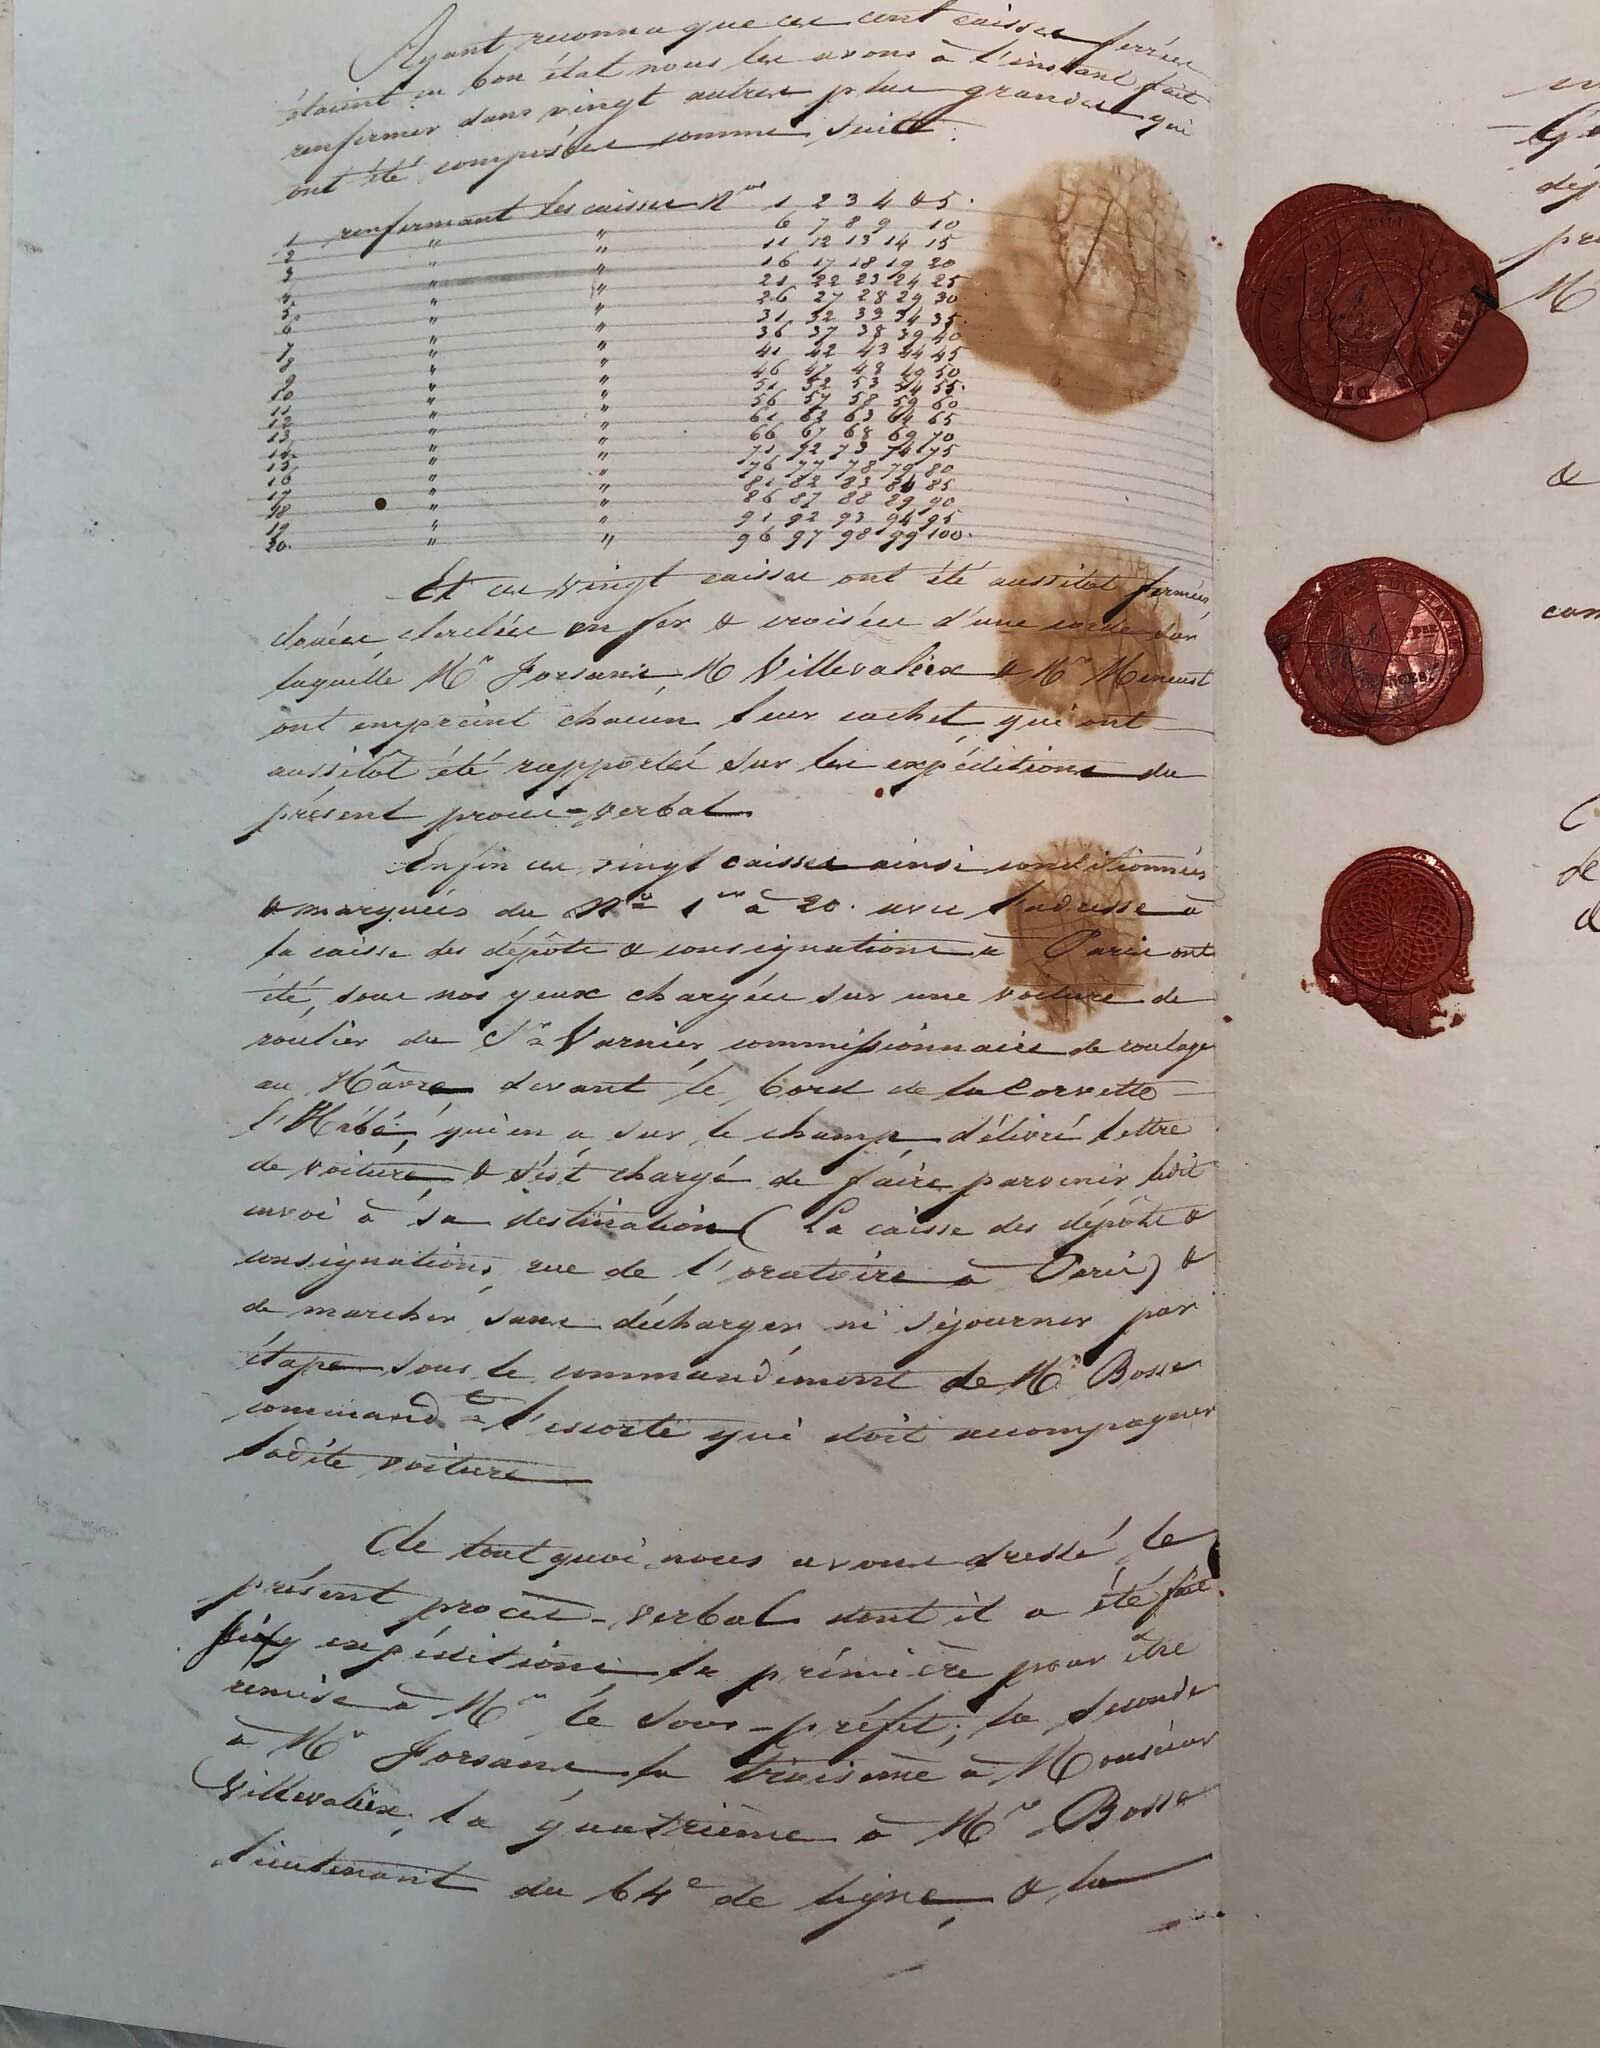 A 1826 report verifying the money that arrived from Haiti aboard a French ship in locked cases.